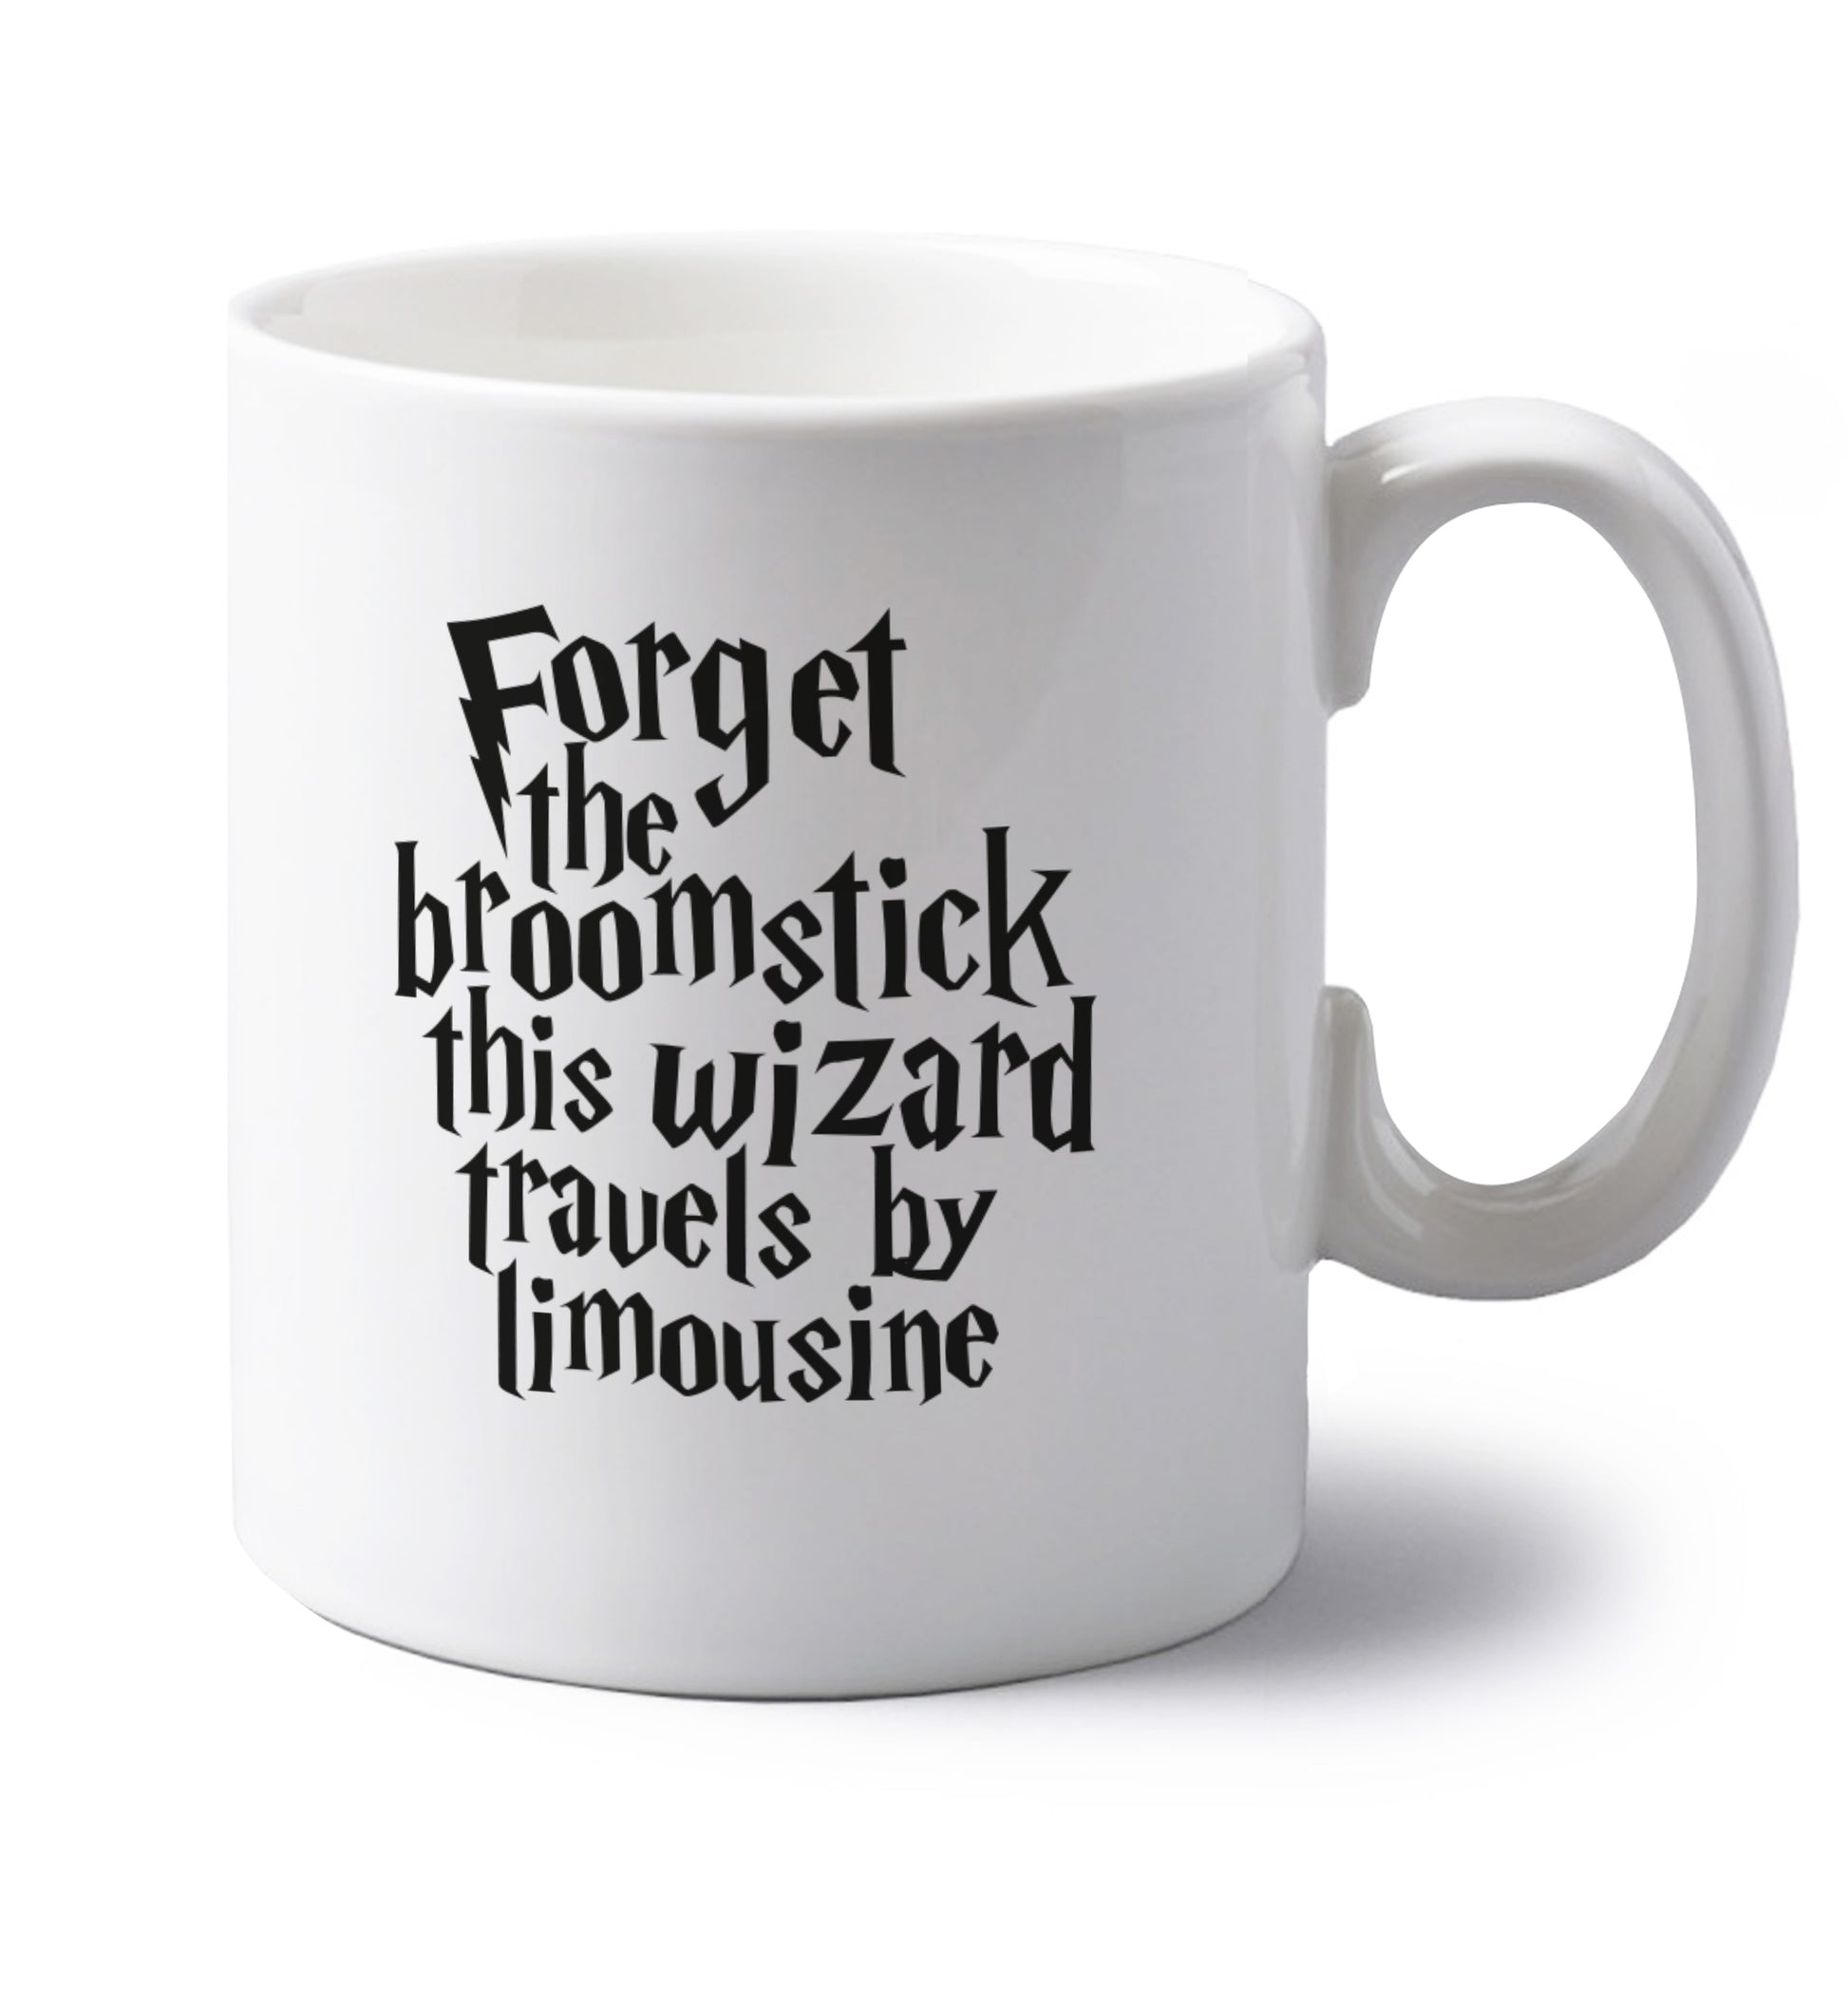 Forget the broomstick this wizard travels by limousine left handed white ceramic mug 